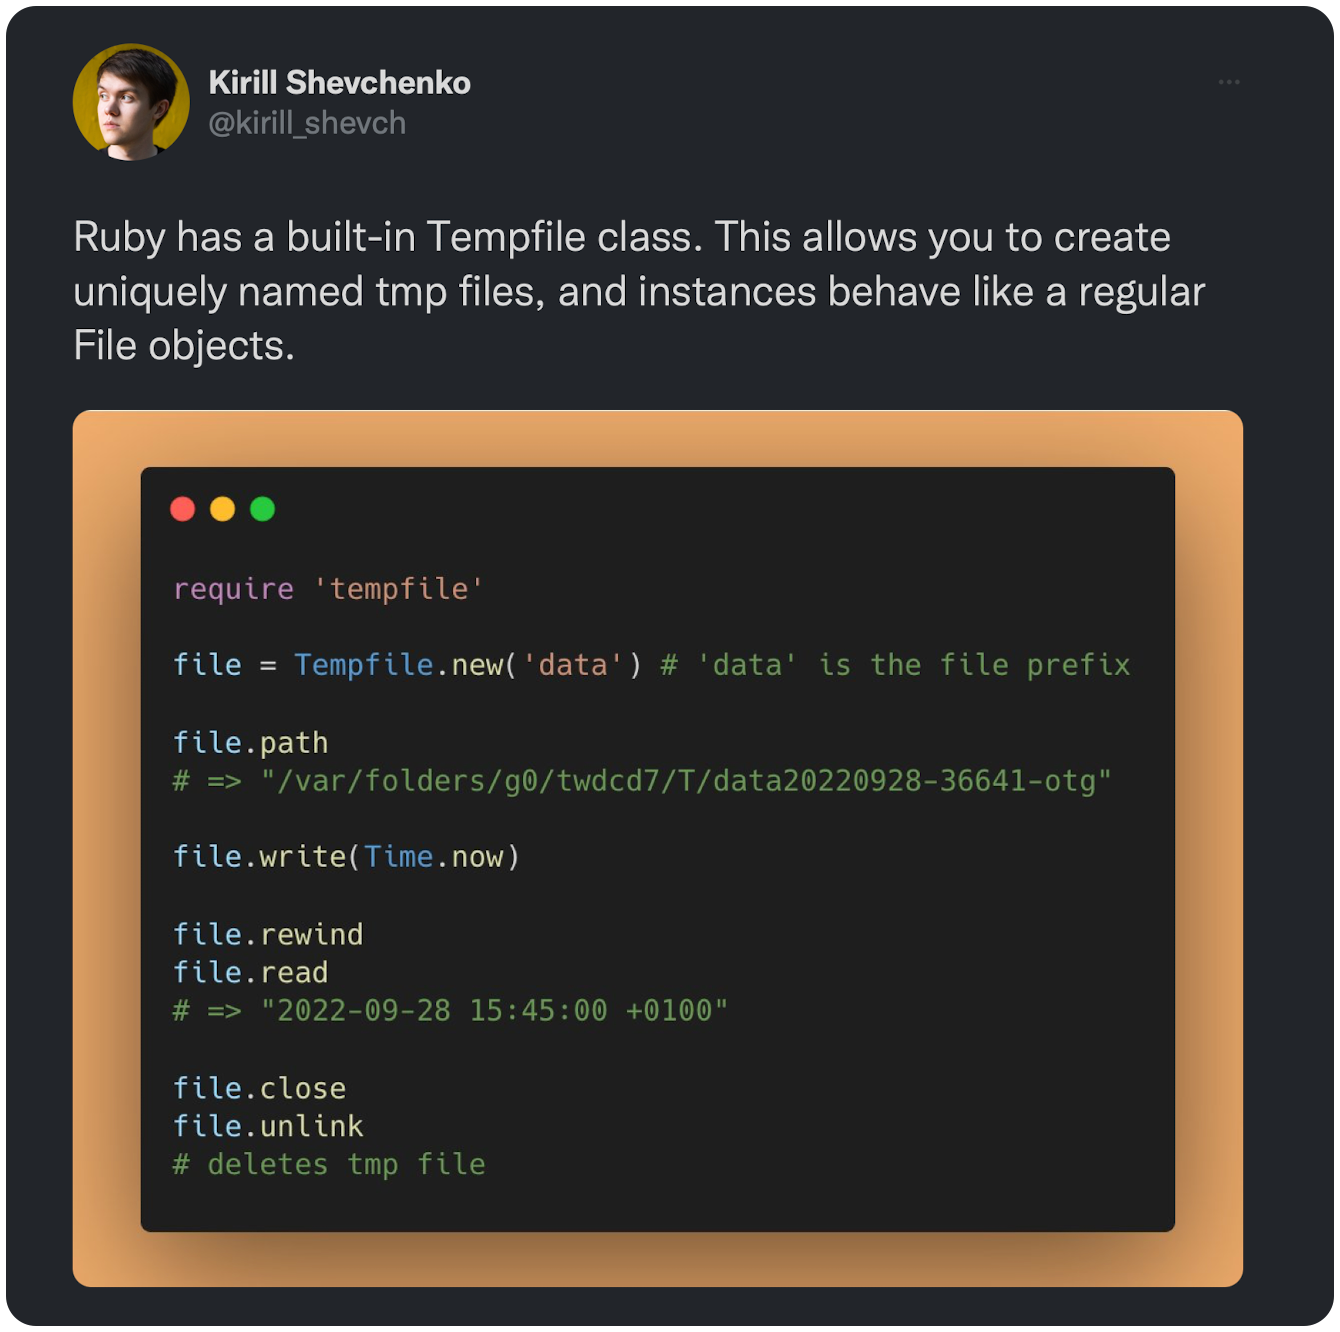 Ruby has a built-in Tempfile class. This allows you to create uniquely named tmp files, and instances behave like a regular File objects. 